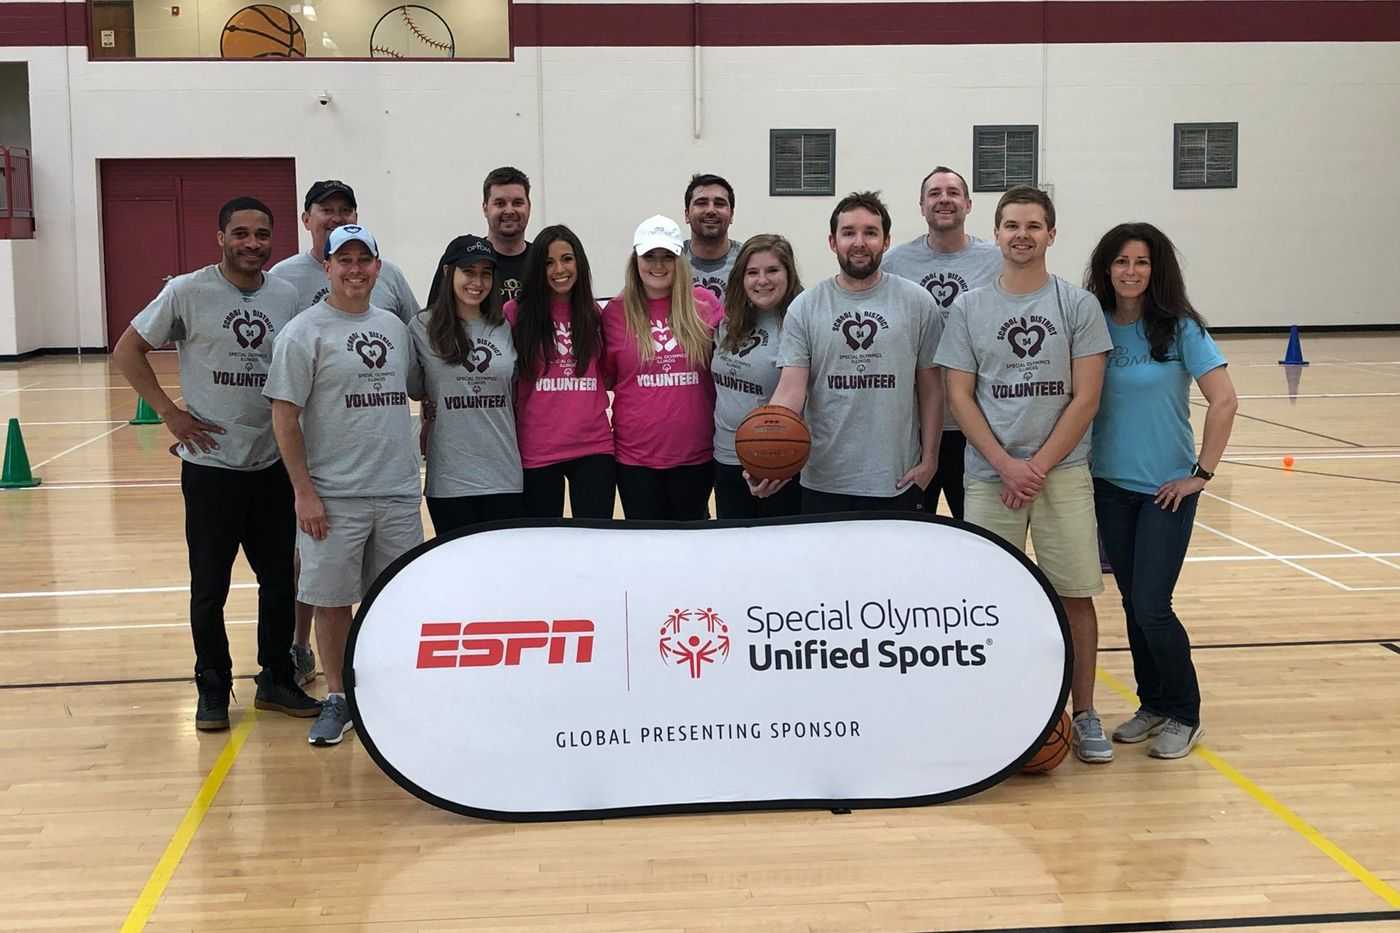 Chicago Office Volunteered at the Special Olympics Unified Sports Event